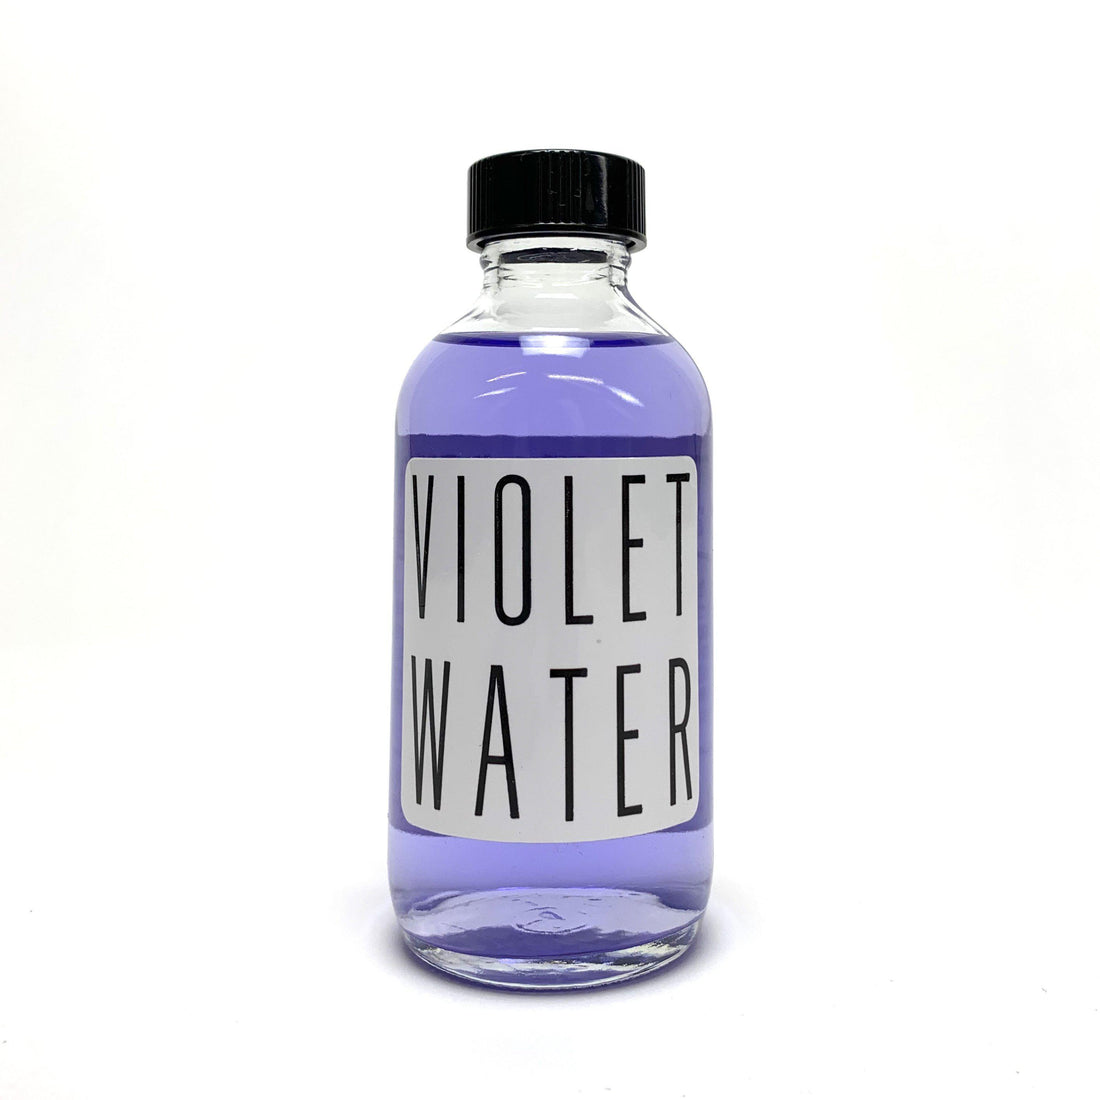 Violet Water Holy Waters and Colognes House of Intuition 4 oz $12.00 